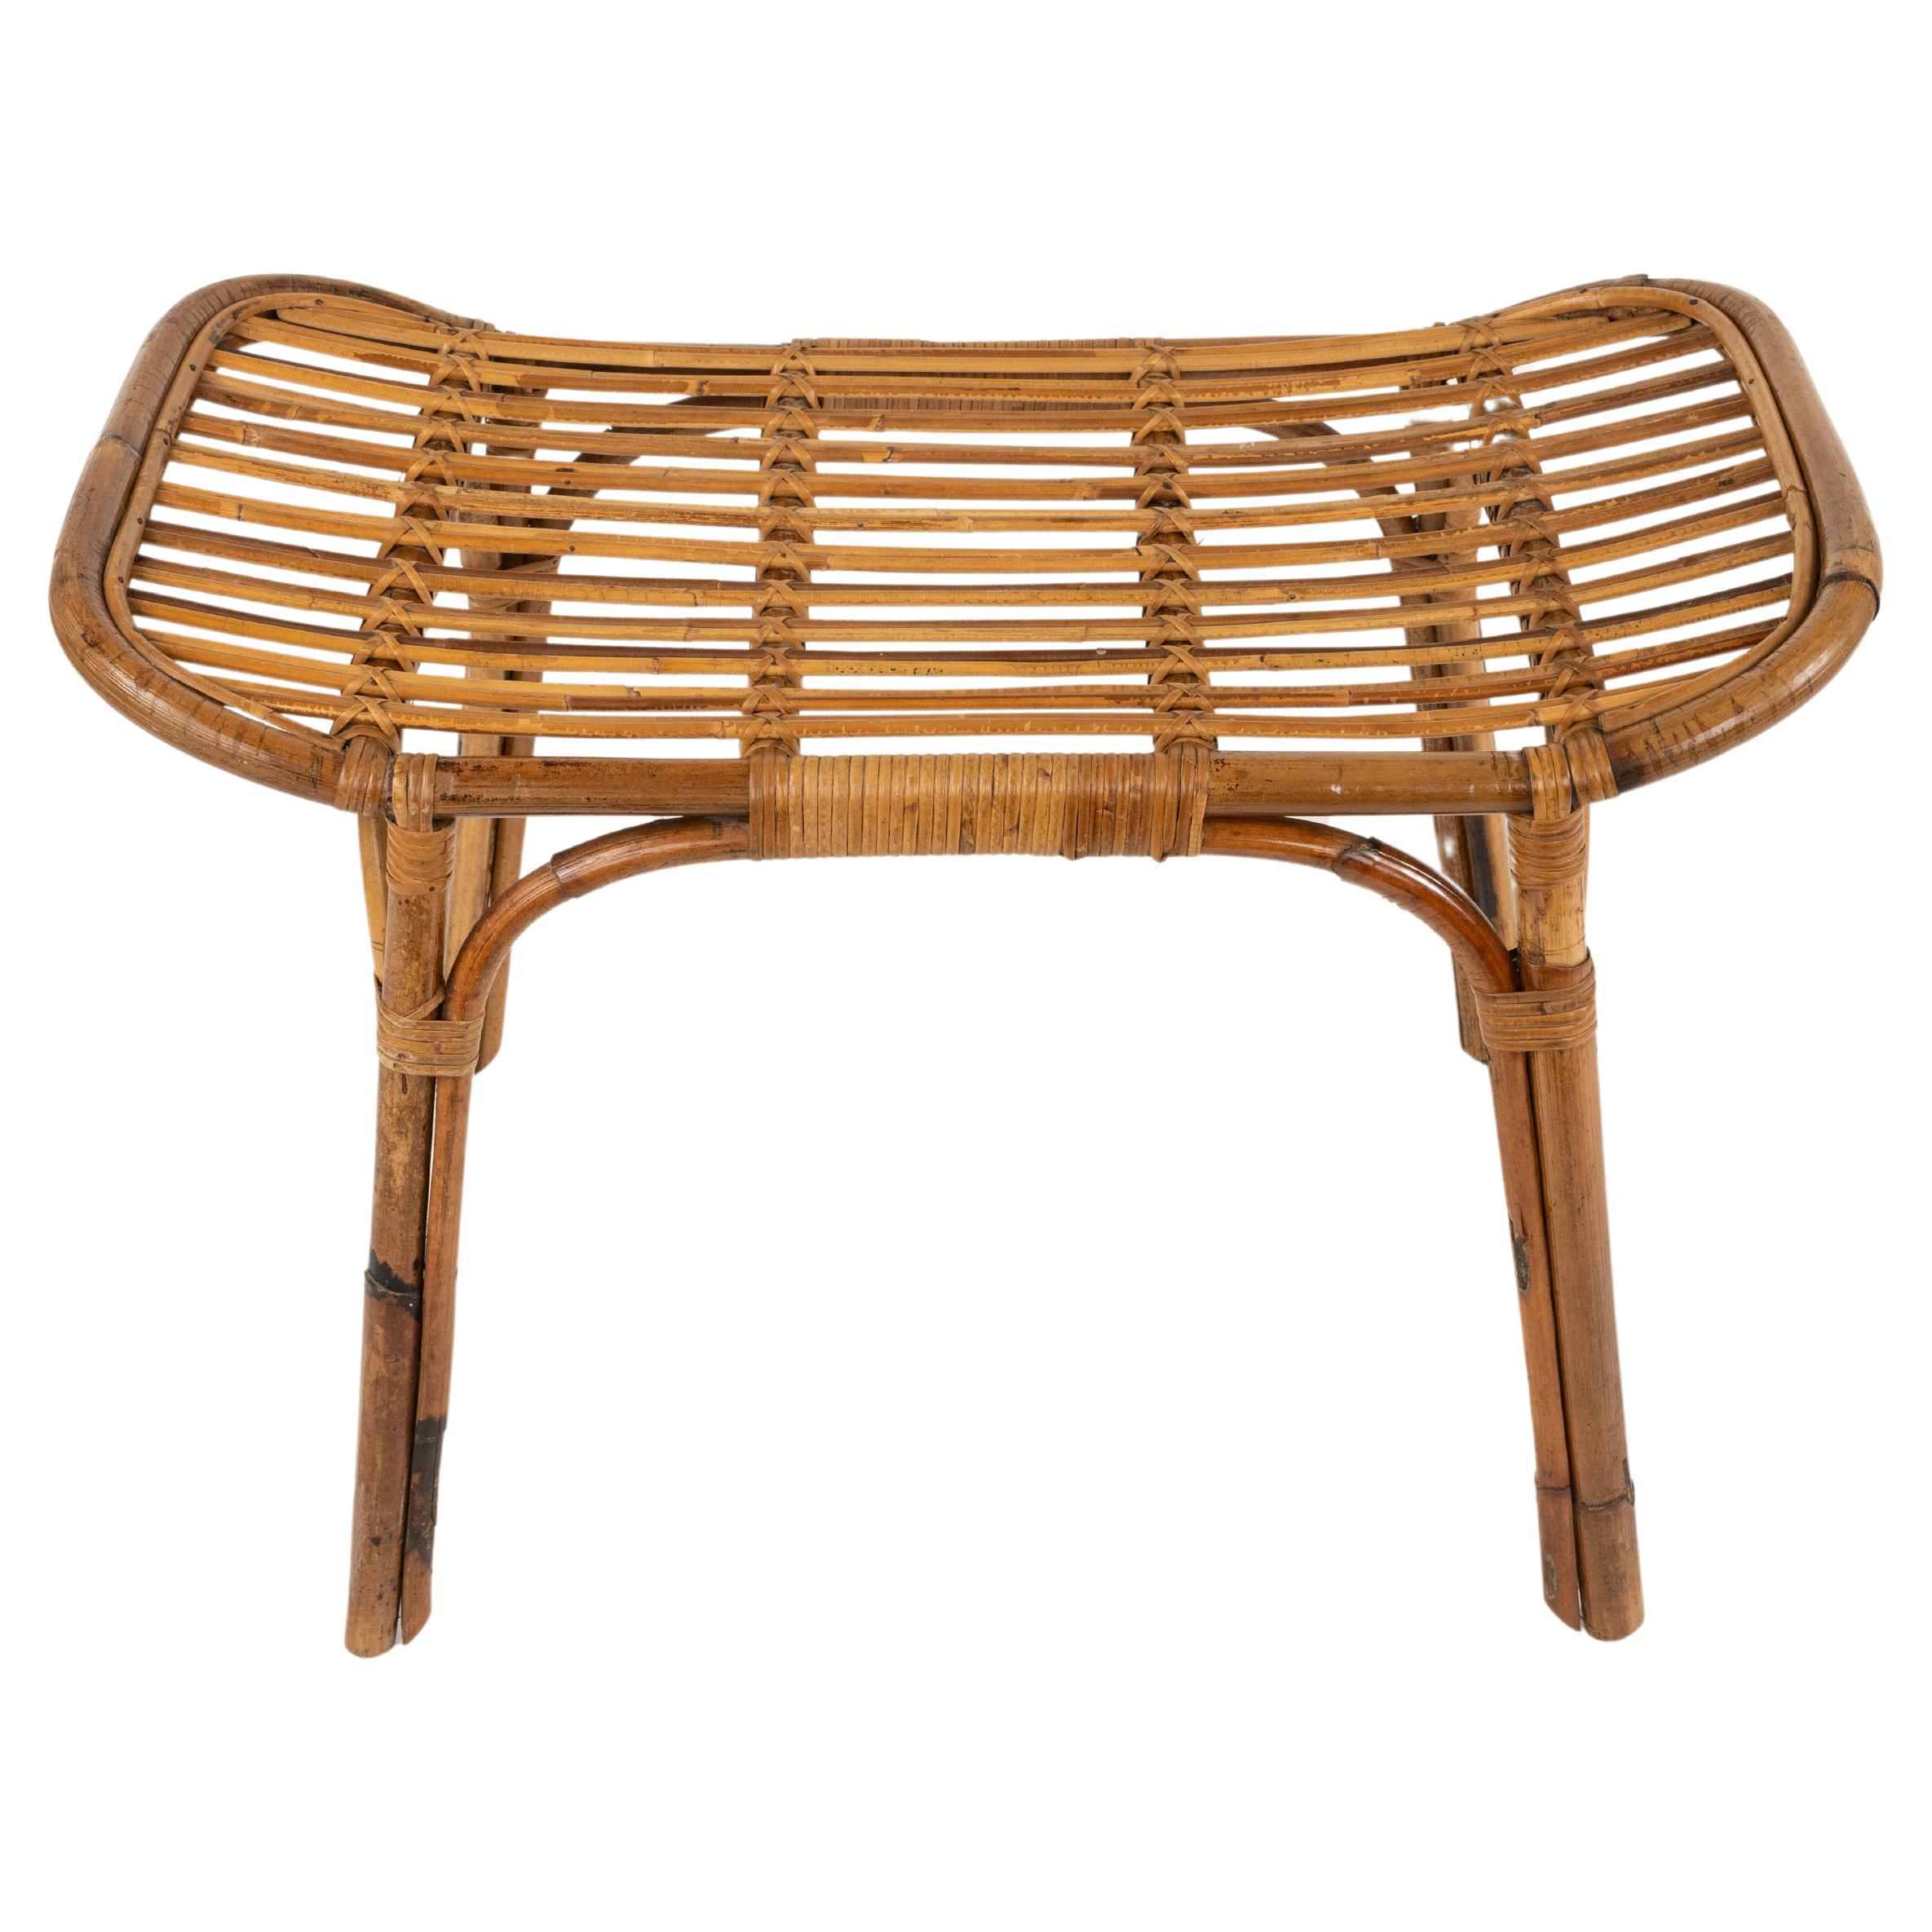 Midcentury Bench or Side Table in Rattan & Bamboo Tito Agnoli Style, Italy 1960s For Sale